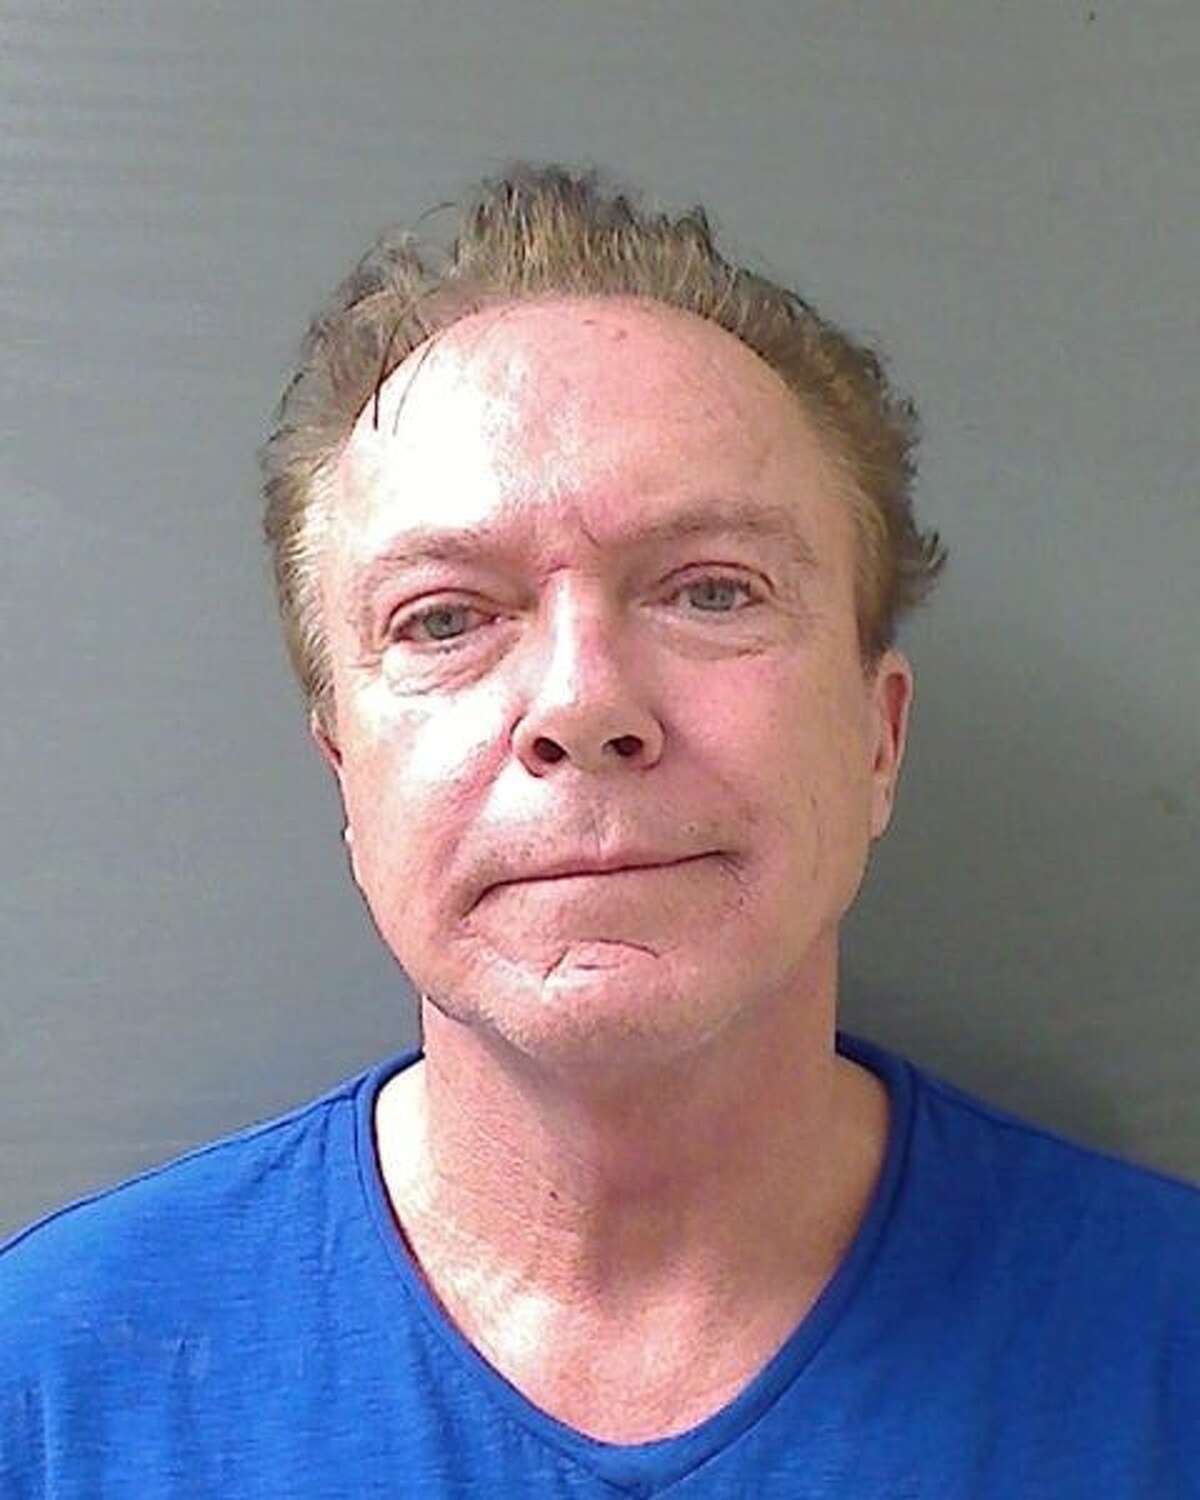 The mugshot from David Cassidy's arrest in Schodack on Tuesday. (Schodack Police Department) ORG XMIT: MER2013082112092330